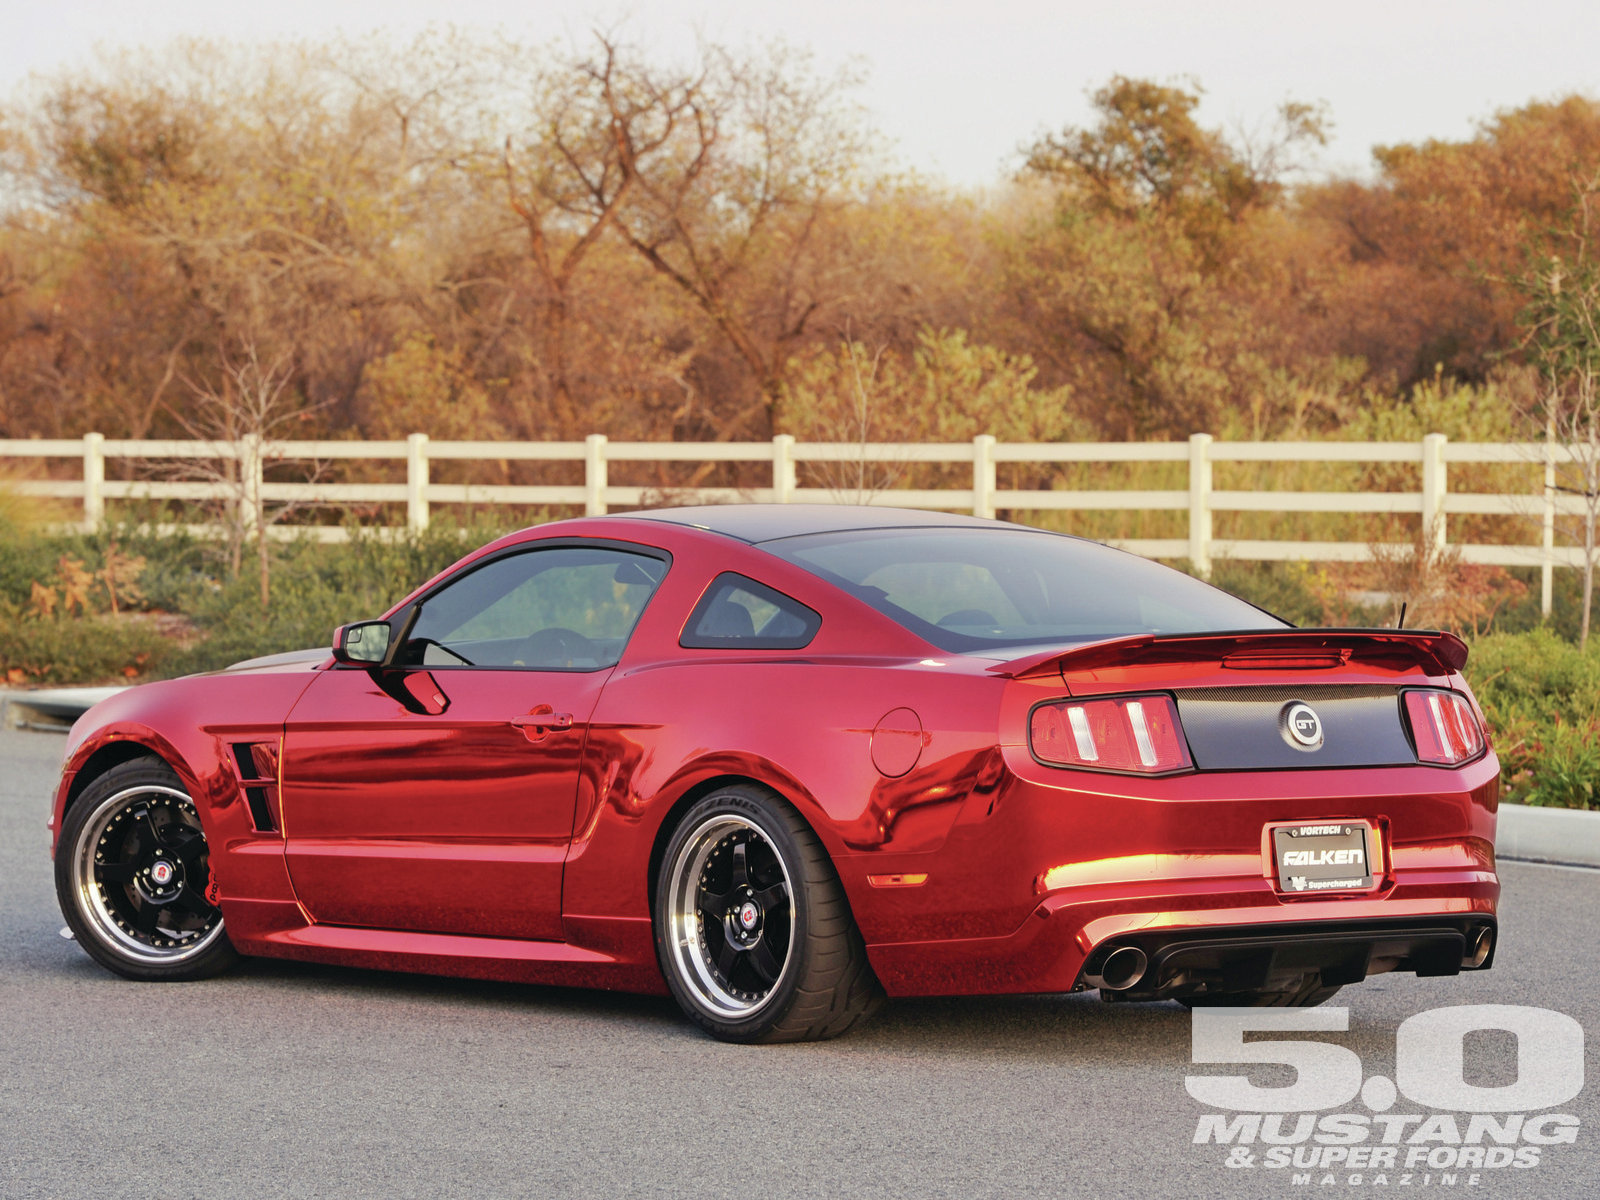  Ford Mustang Gt Cellphone FHD pic